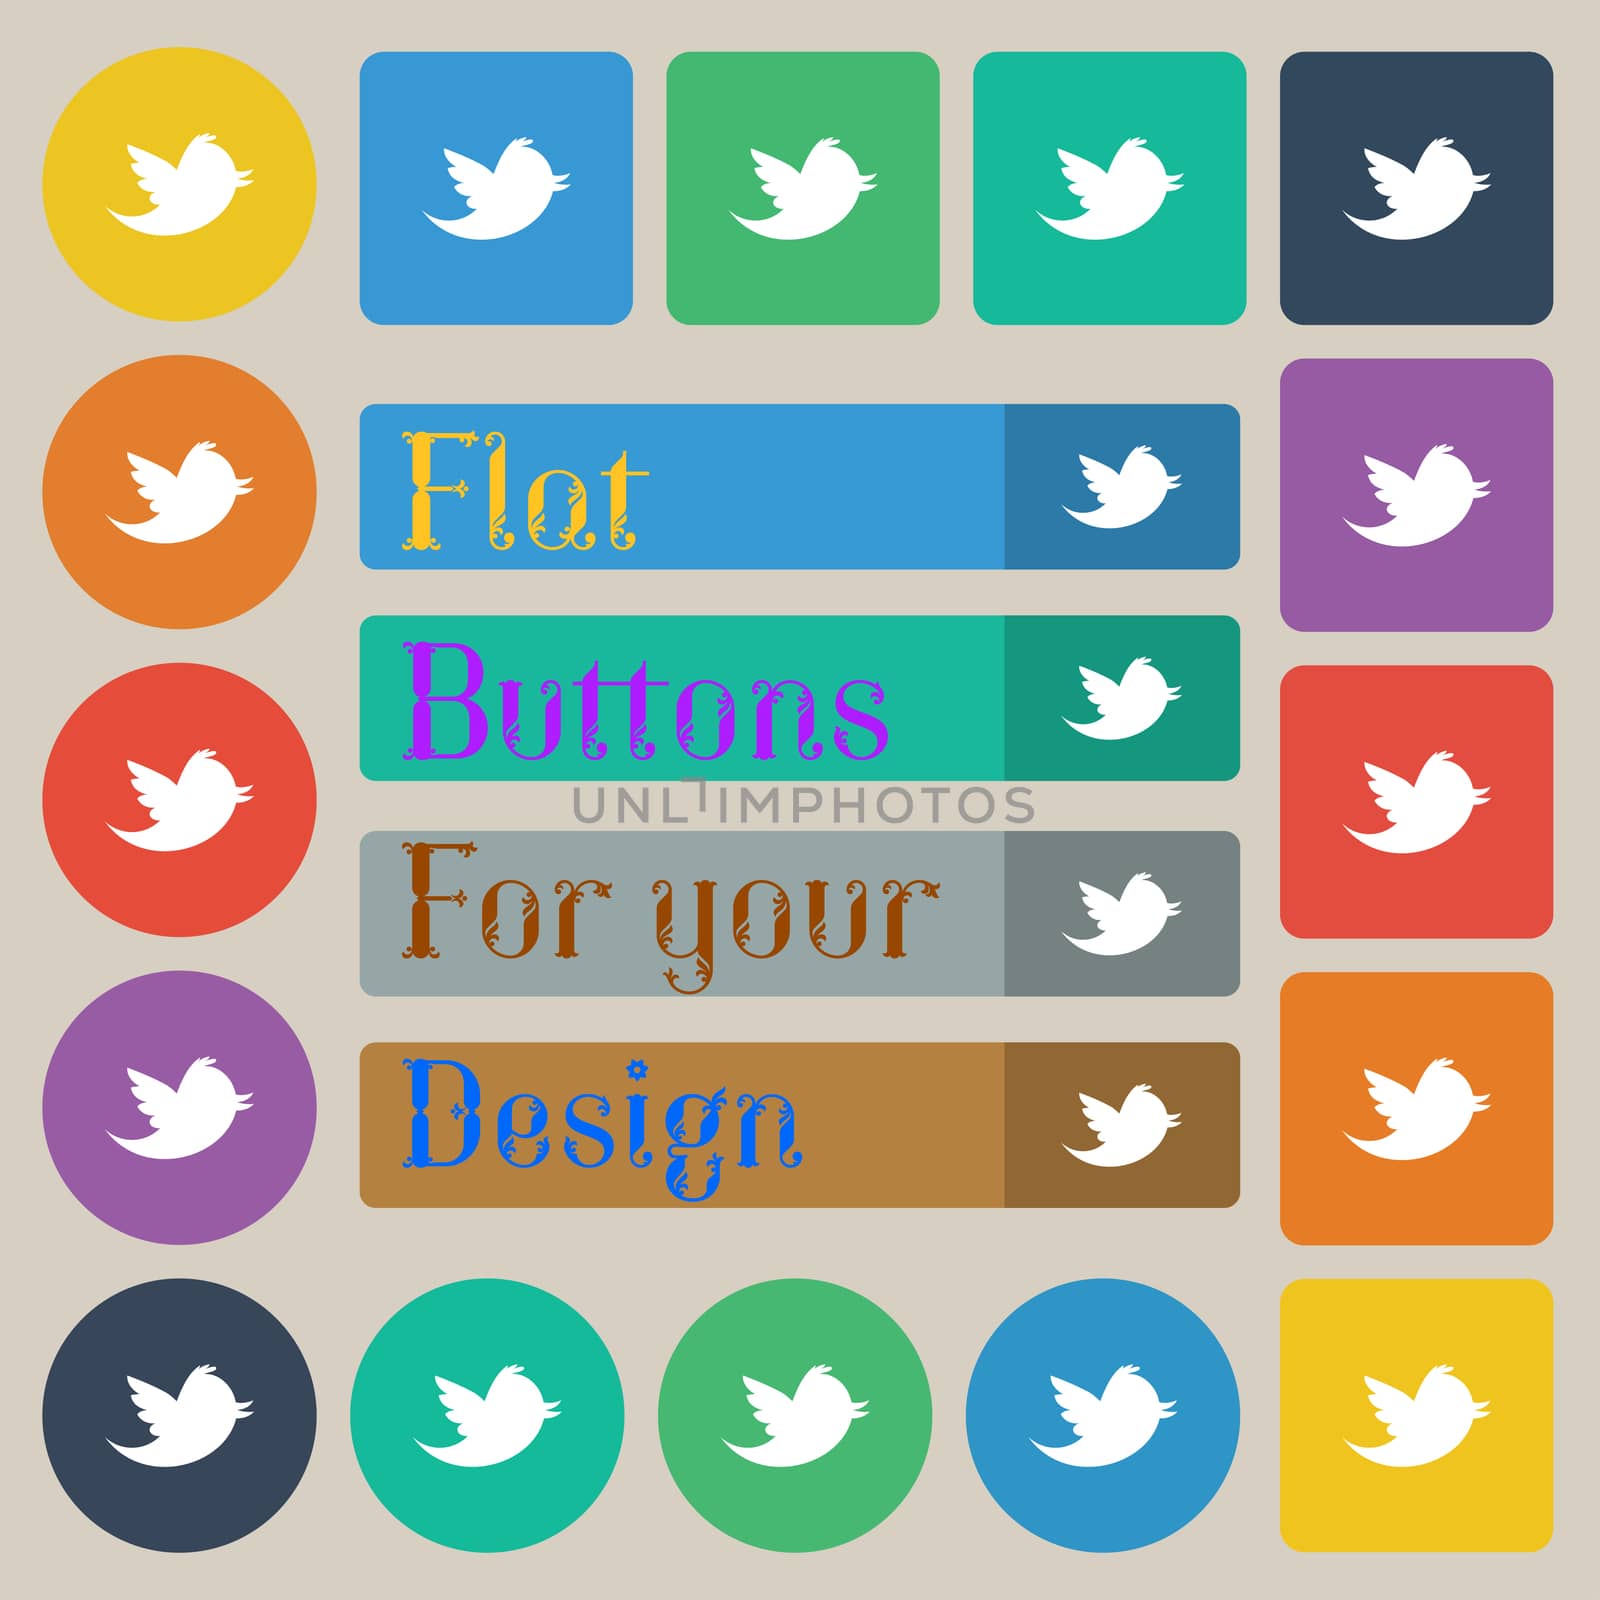 messages retweet icon sign. Set of twenty colored flat, round, square and rectangular buttons. illustration